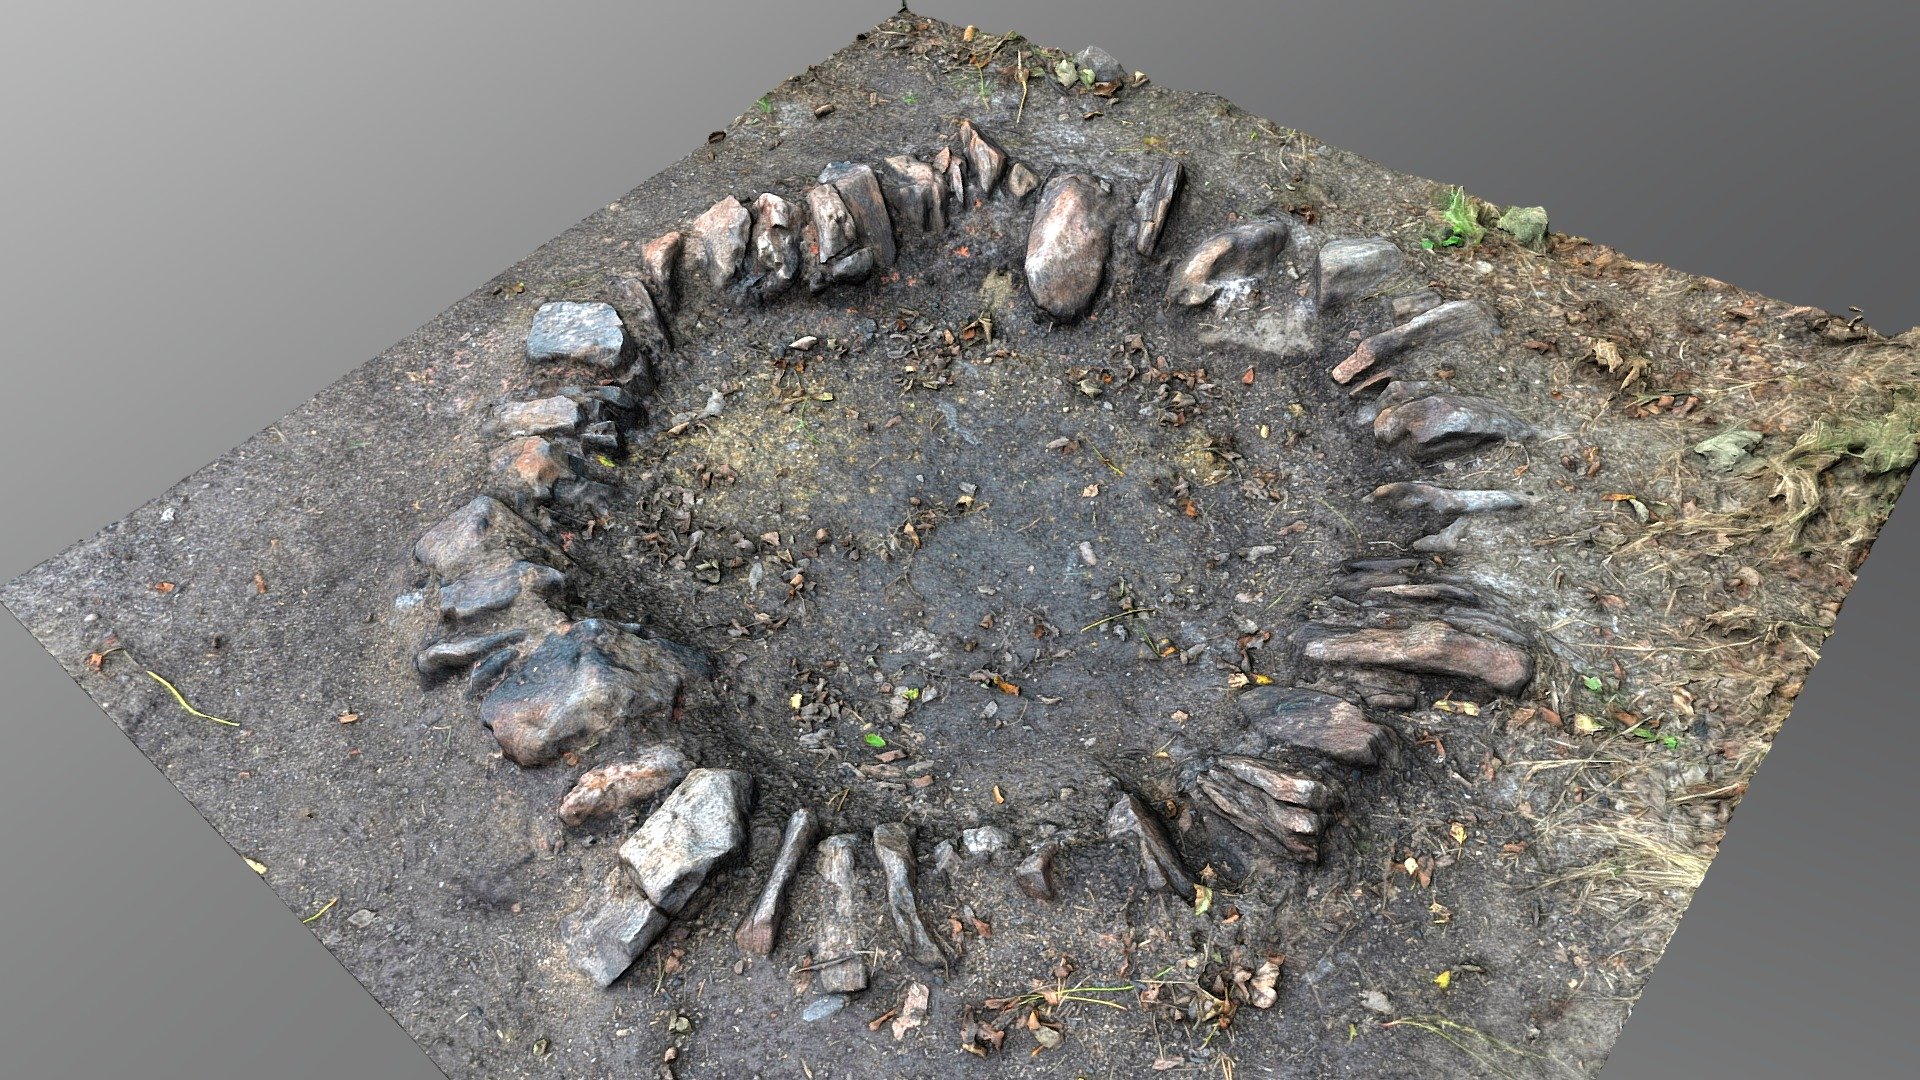 Fireplace fire pit hole in meadow forest, campfire natural made of stones and bricks

photogrammetry scan (24MP, 100+) + Reality capture - Fireplace fire pit hole, brick campfire - Buy Royalty Free 3D model by matousekfoto 3d model